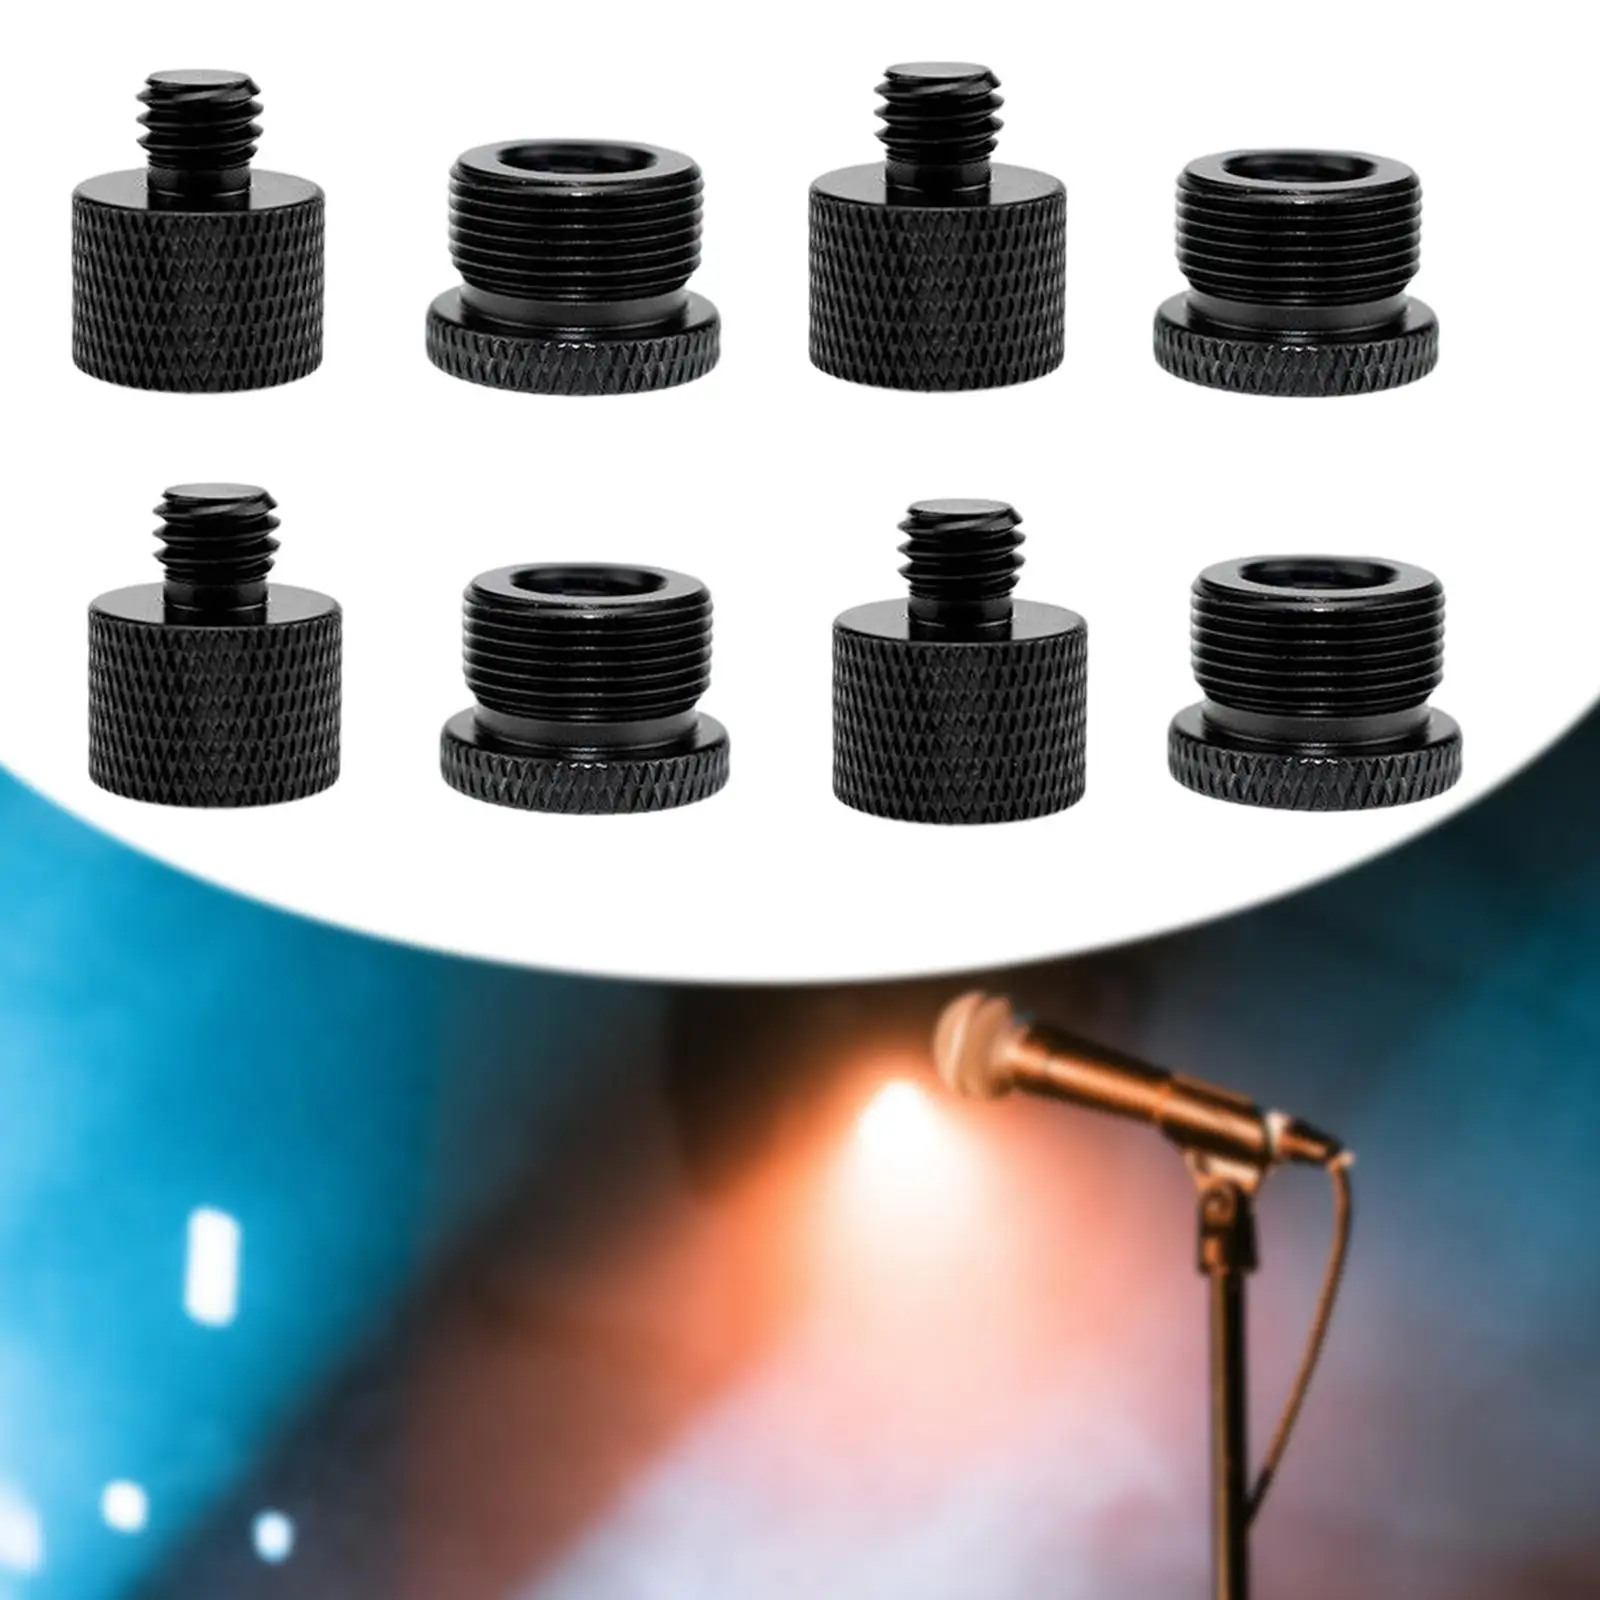 8 Pieces Mic Thread Adapter Set Screw Adapter Thread Mic Stand Adapter for Microphone Stand